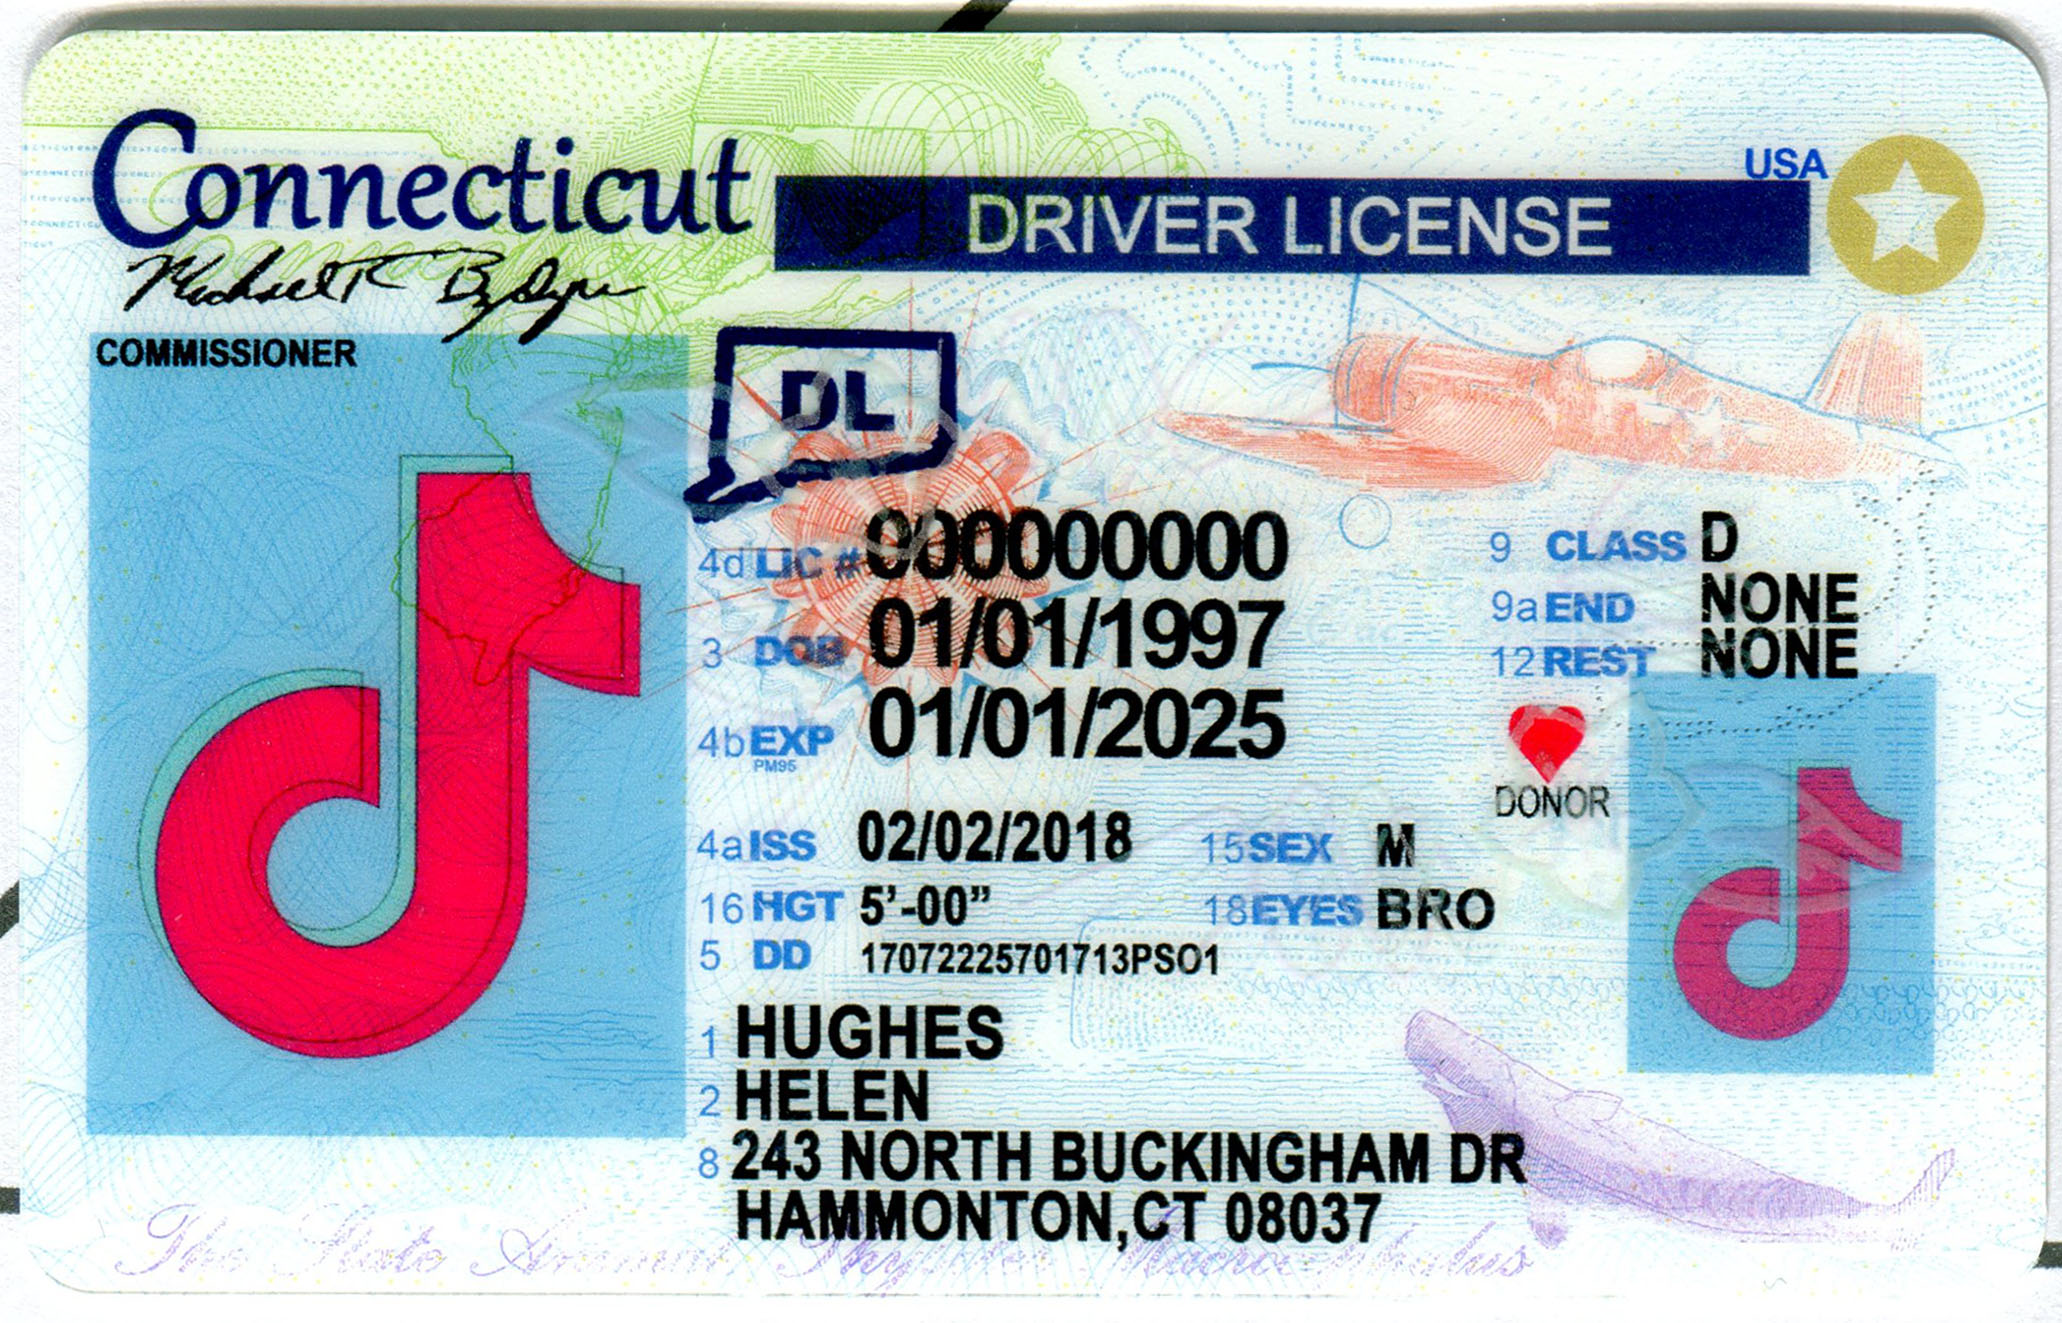 Connecticut-New buy fake id